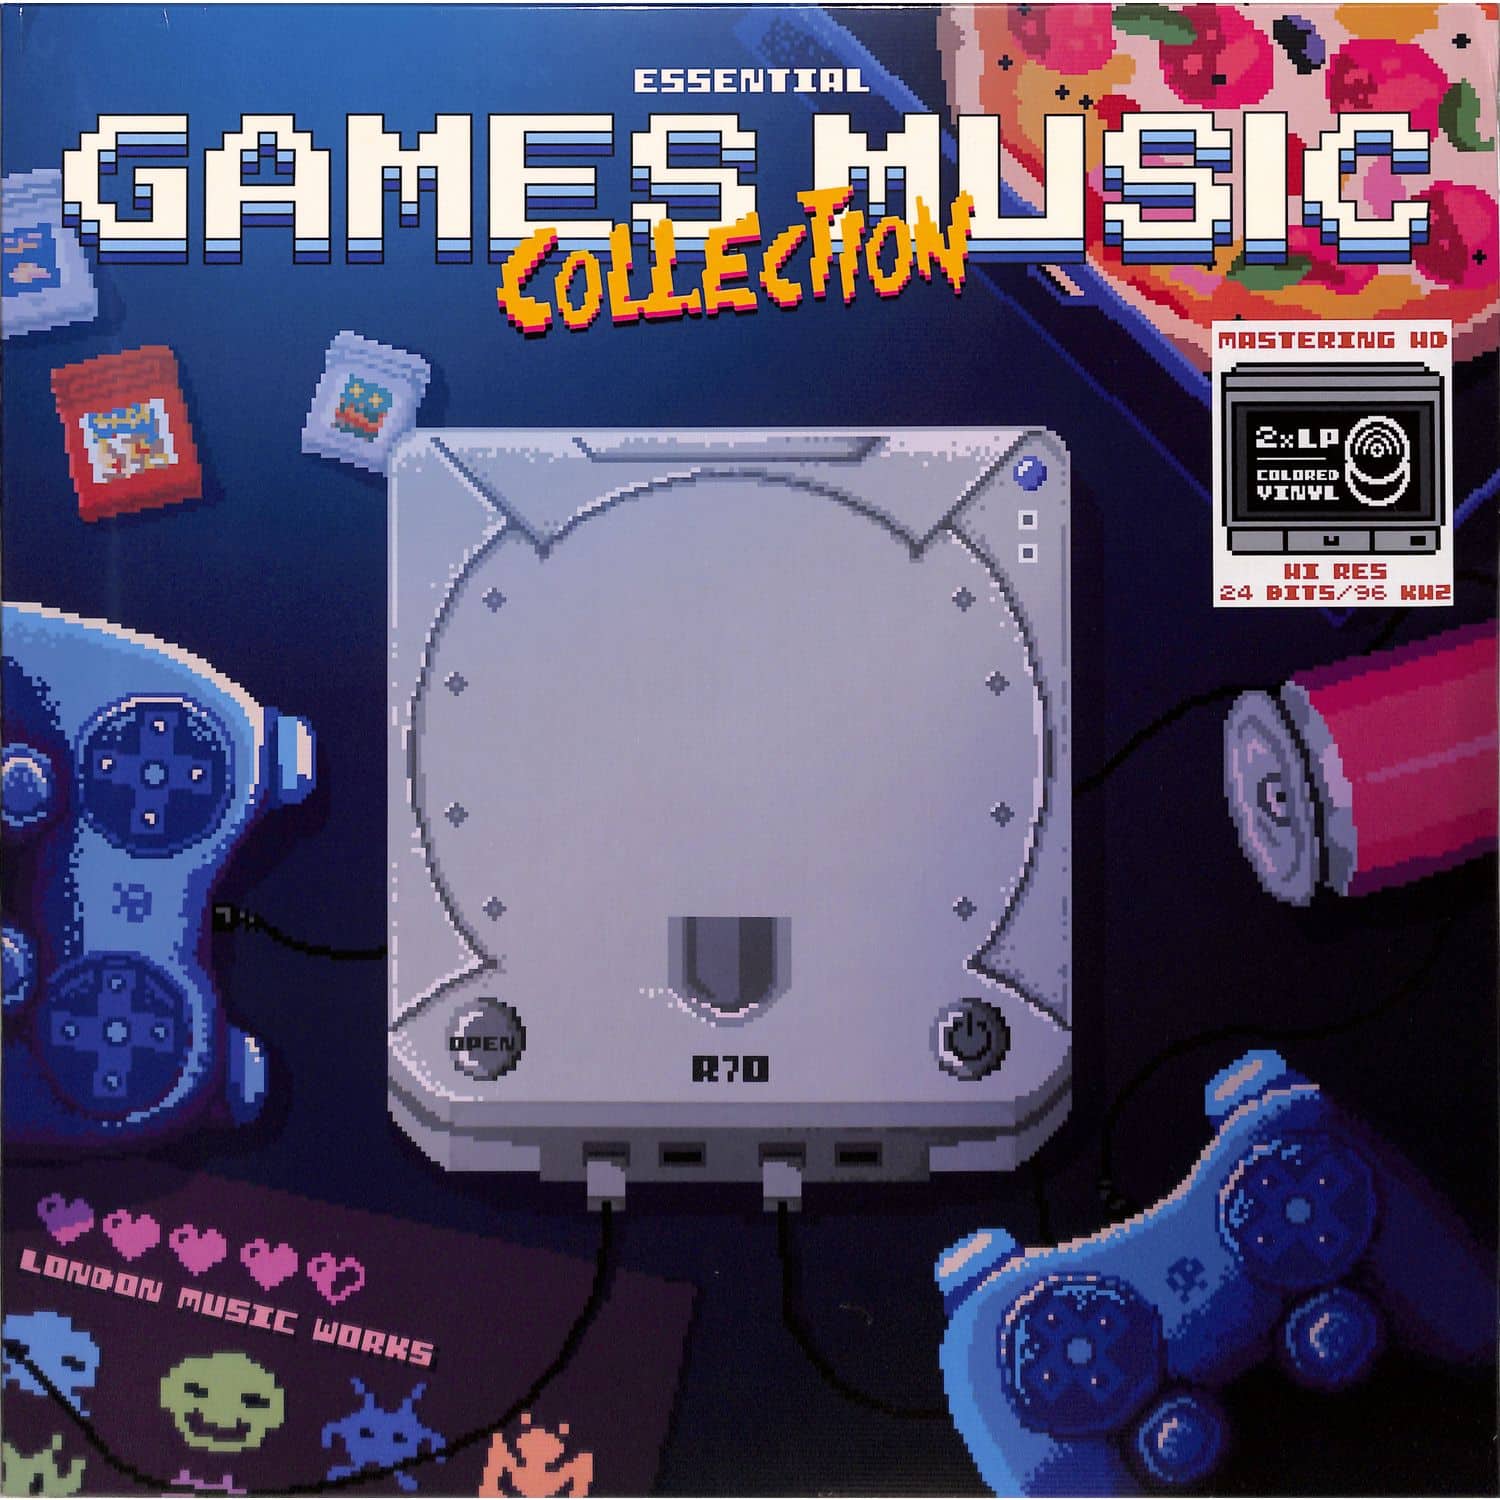 London Music Works - THE ESSENTIAL GAMES MUSIC COLLECTION 